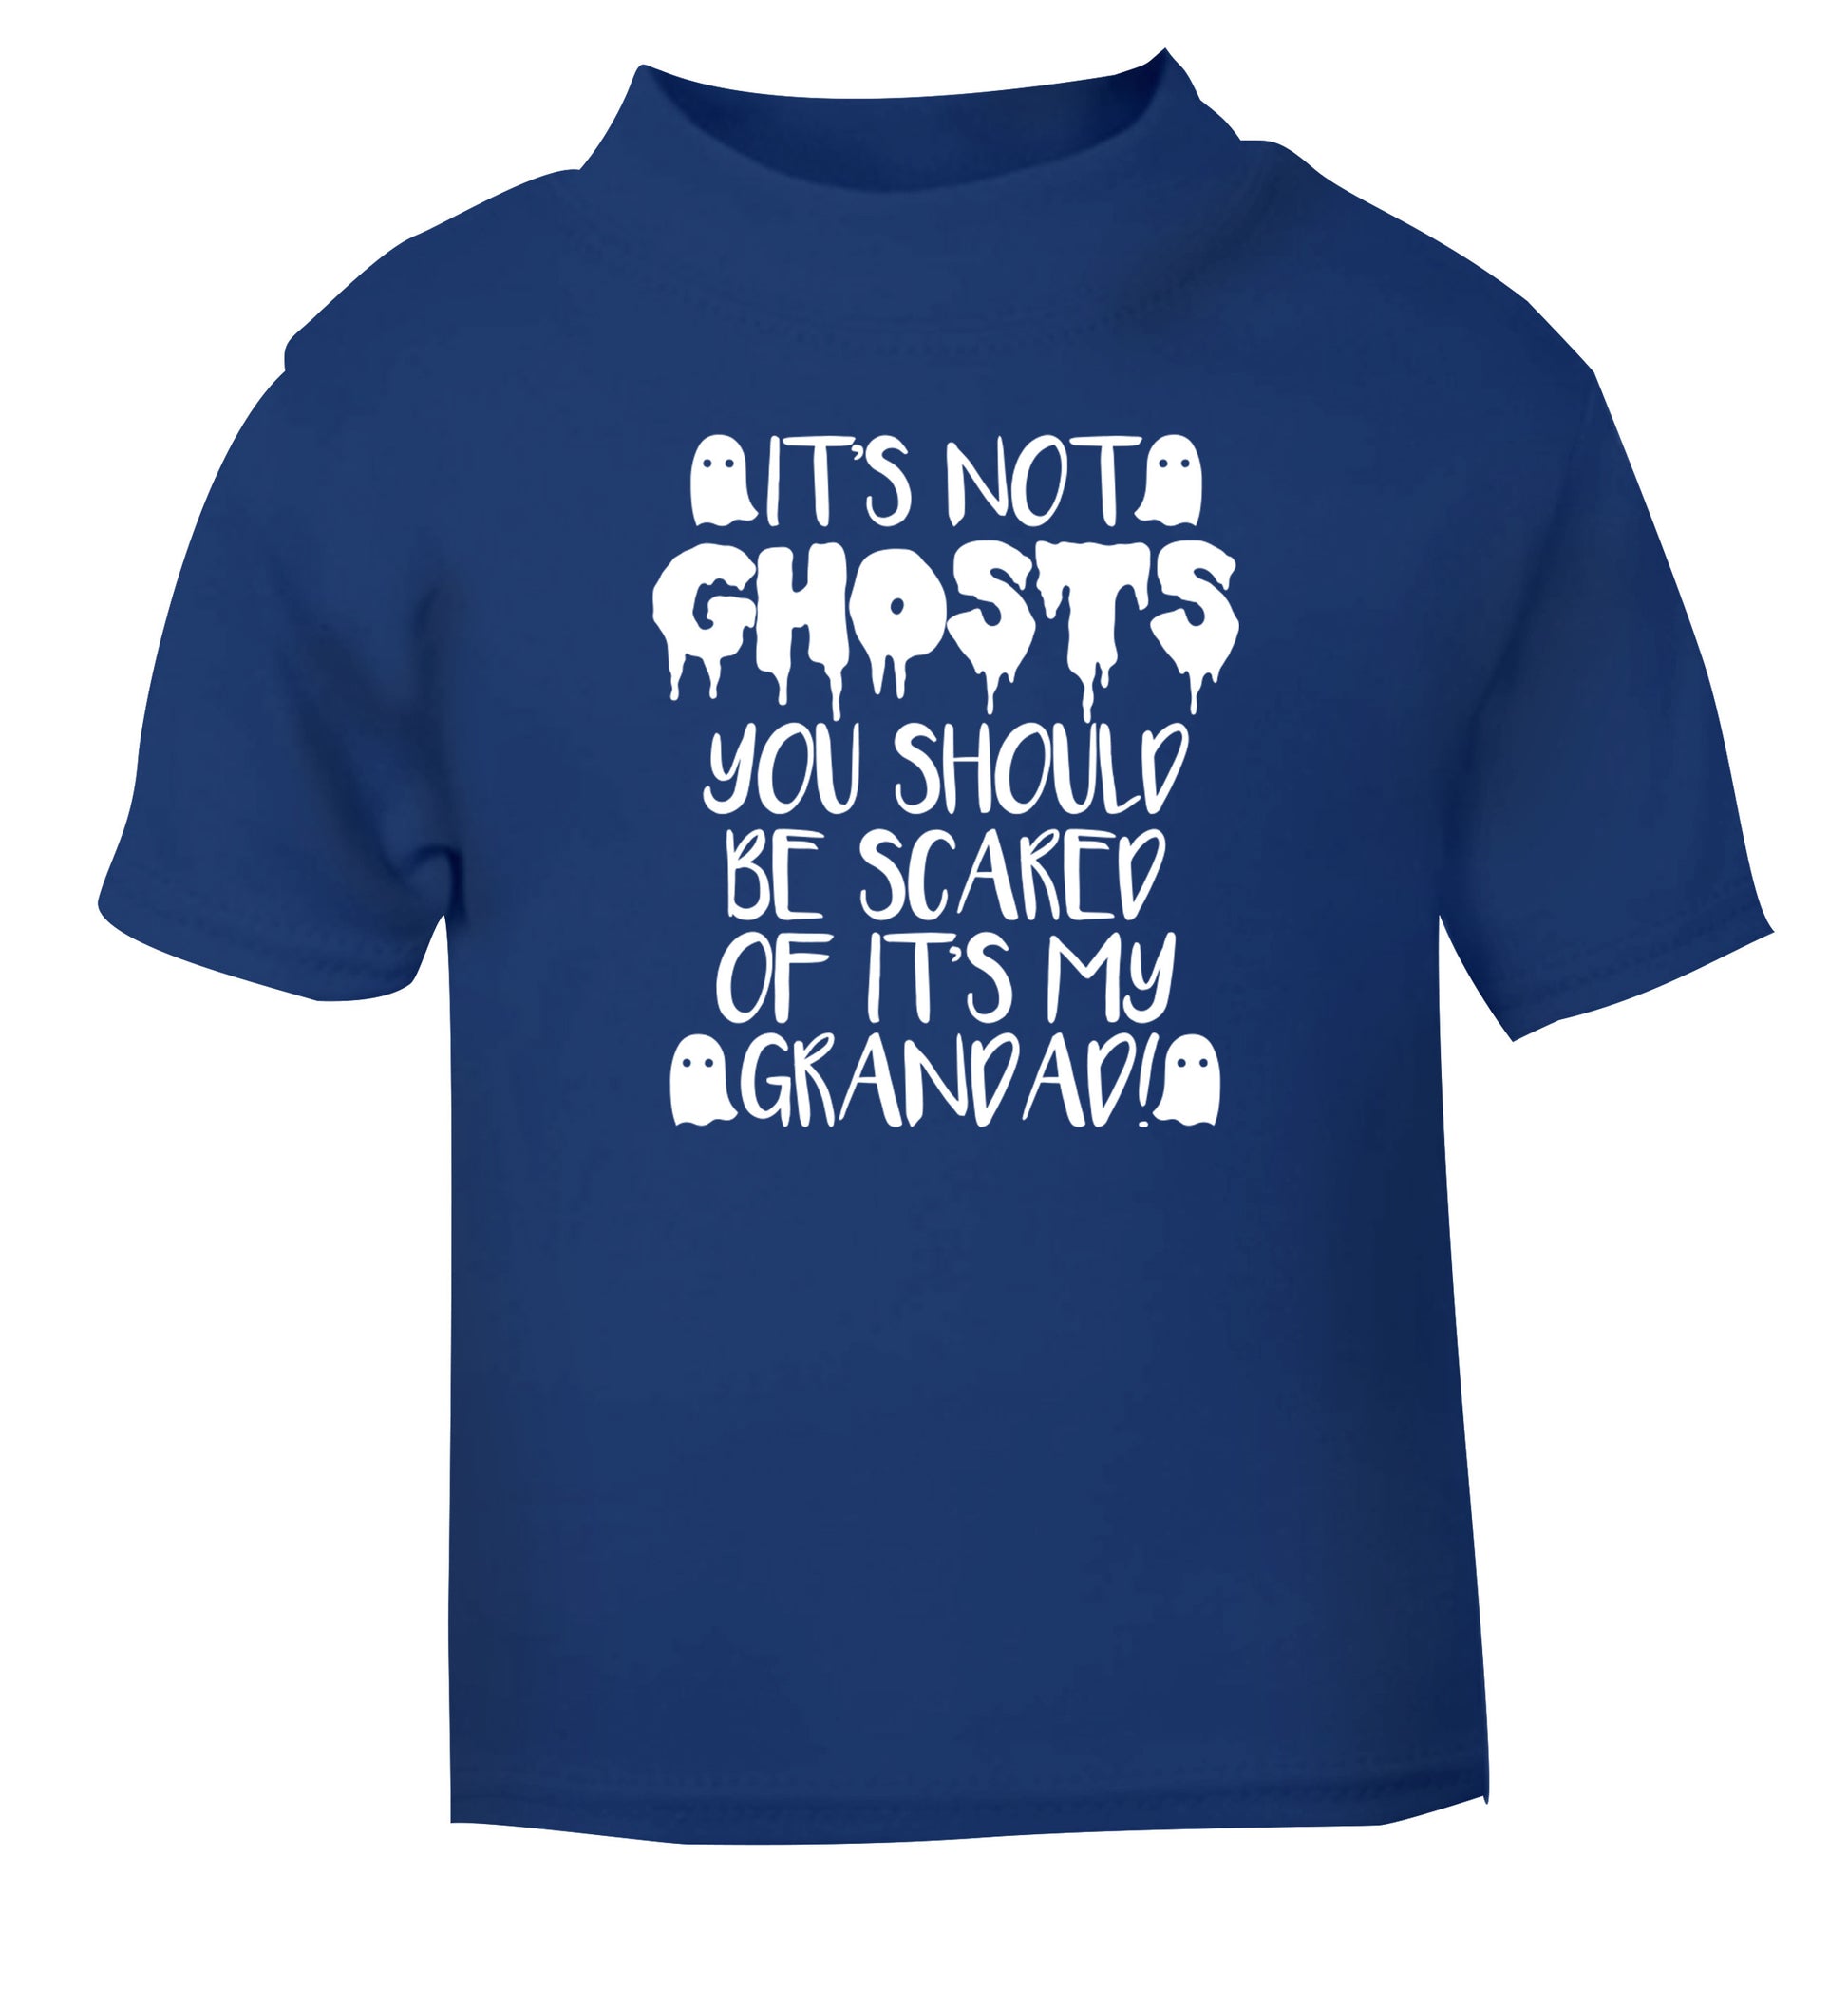 It's not ghosts you should be scared of it's my grandad! blue Baby Toddler Tshirt 2 Years